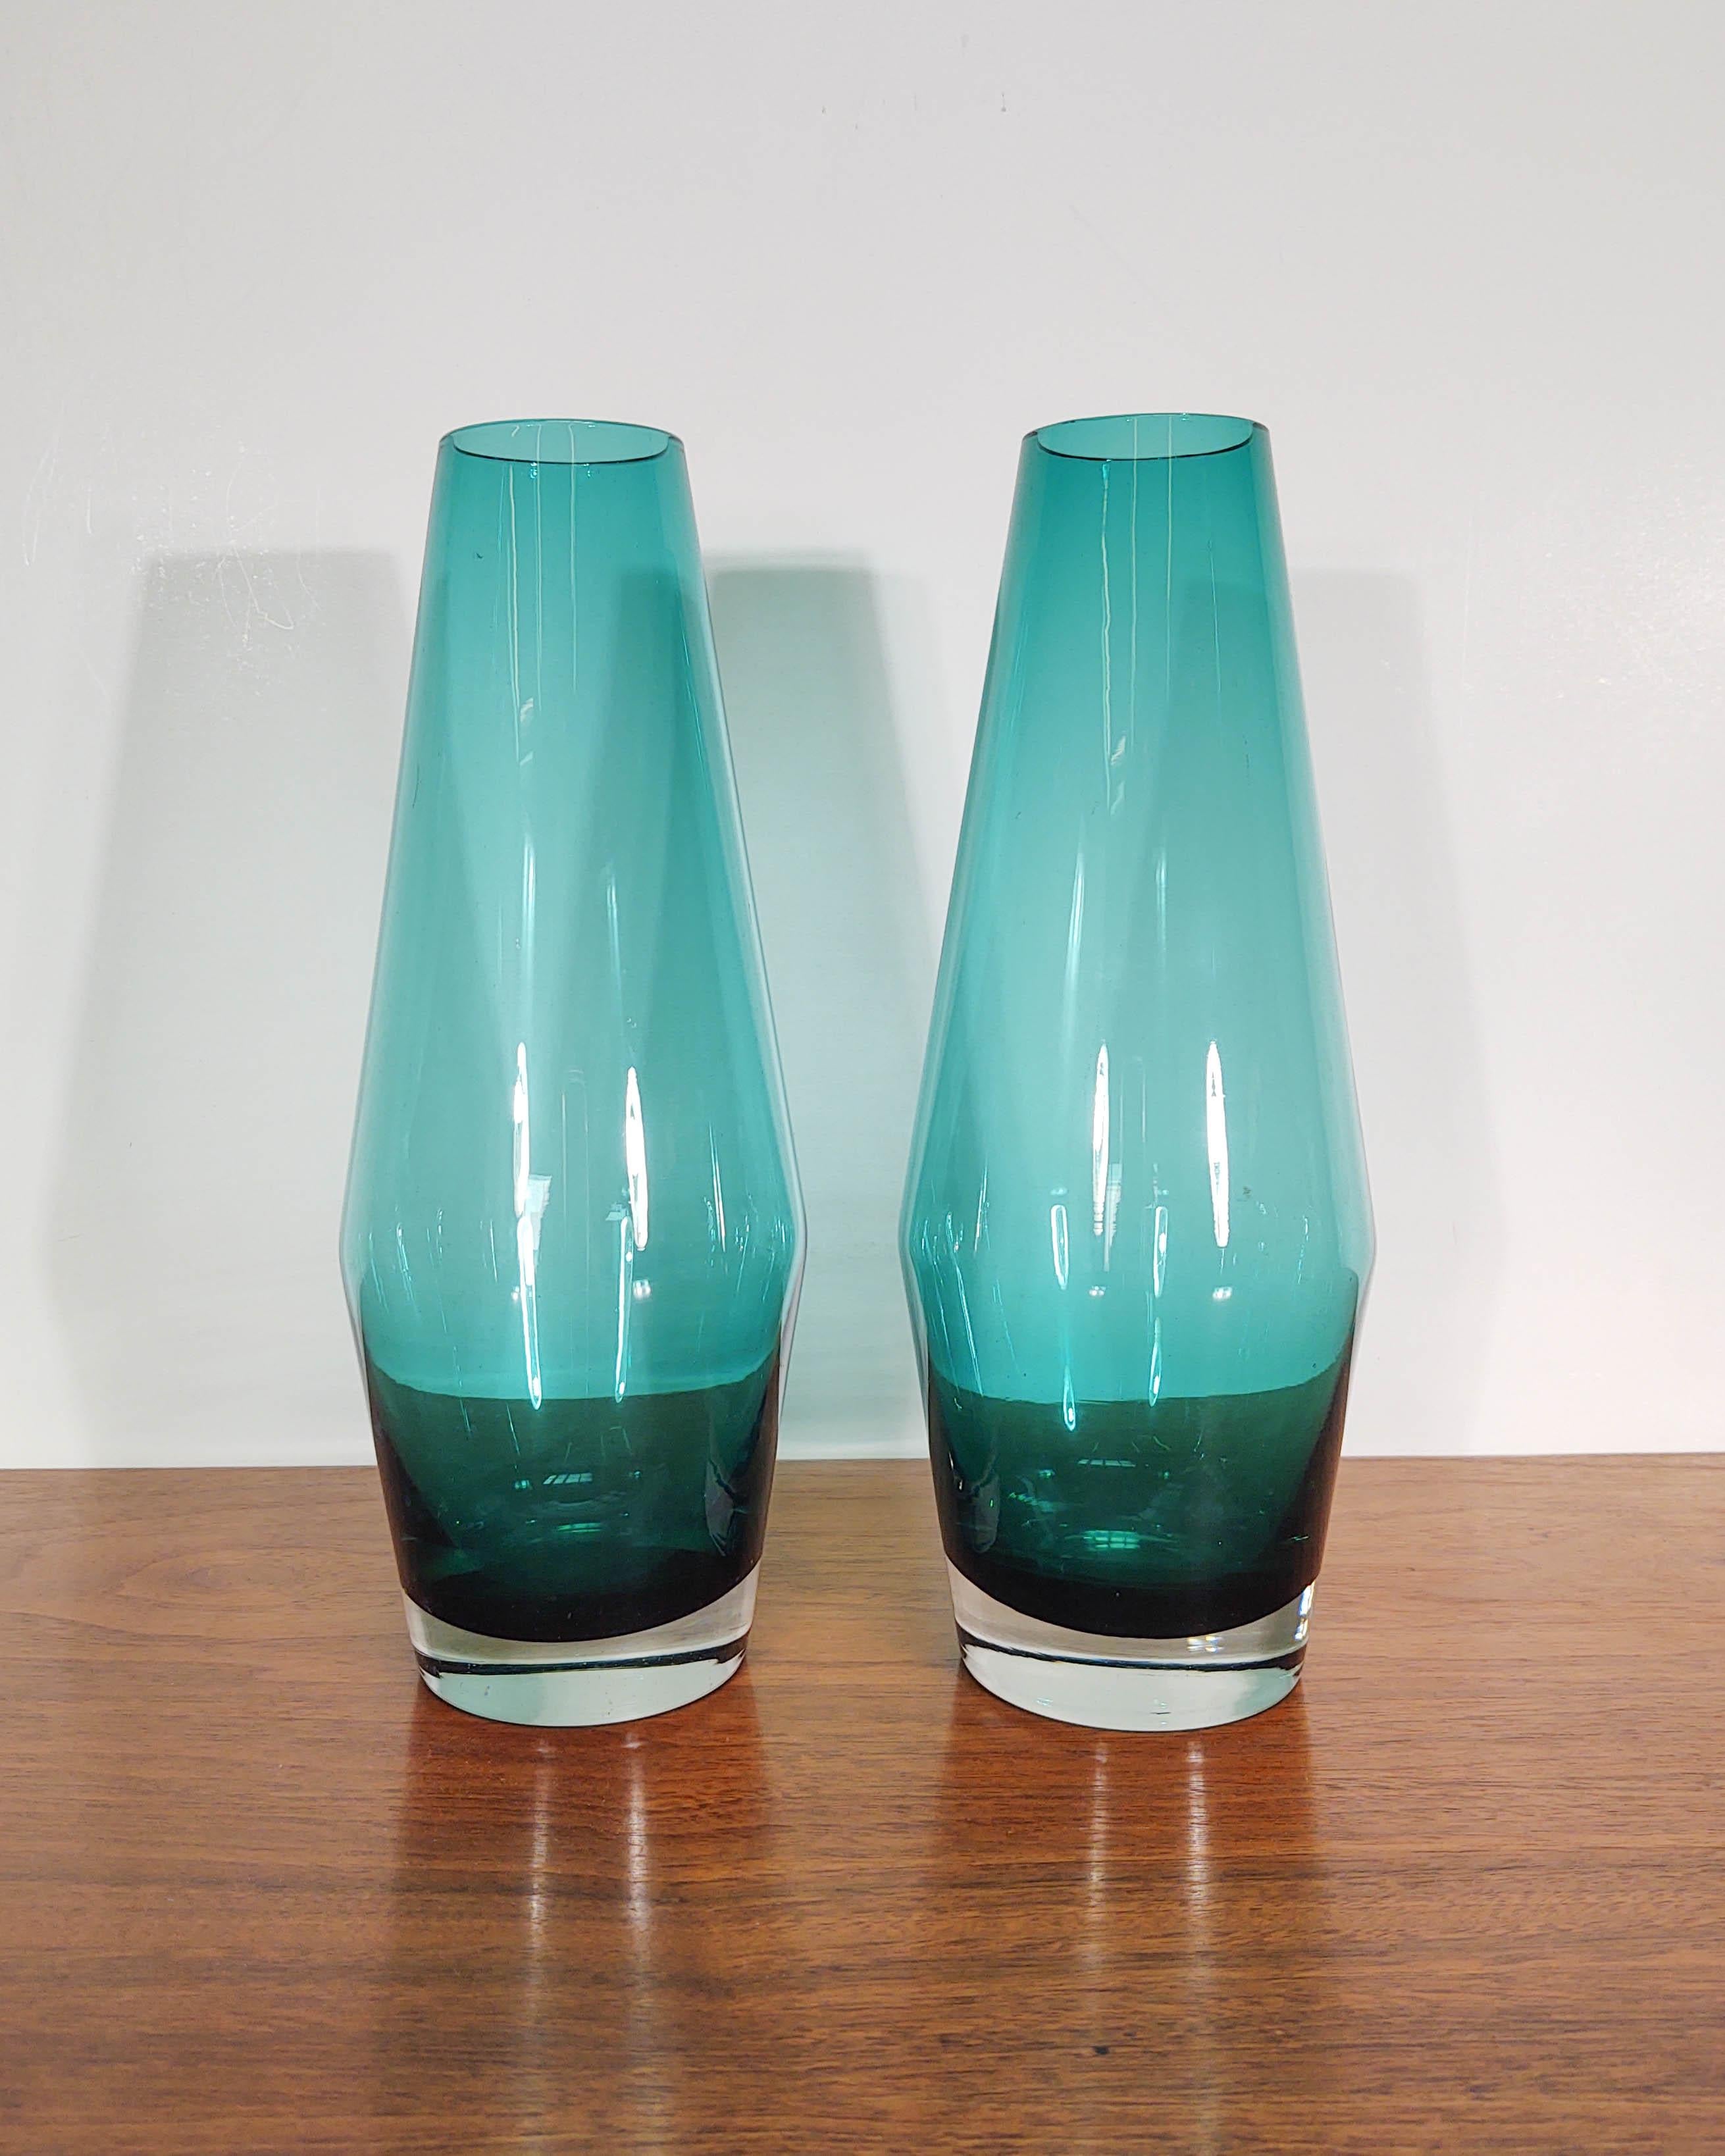 A beautiful matching pair of handmade glass vases by Tamara Aladin for Riihimäen Lasi. The lines of this vase are simple and beautiful. Clear thick glass as a base makes for a sturdy vase that doesn't tip over easily. This is a blown art vase